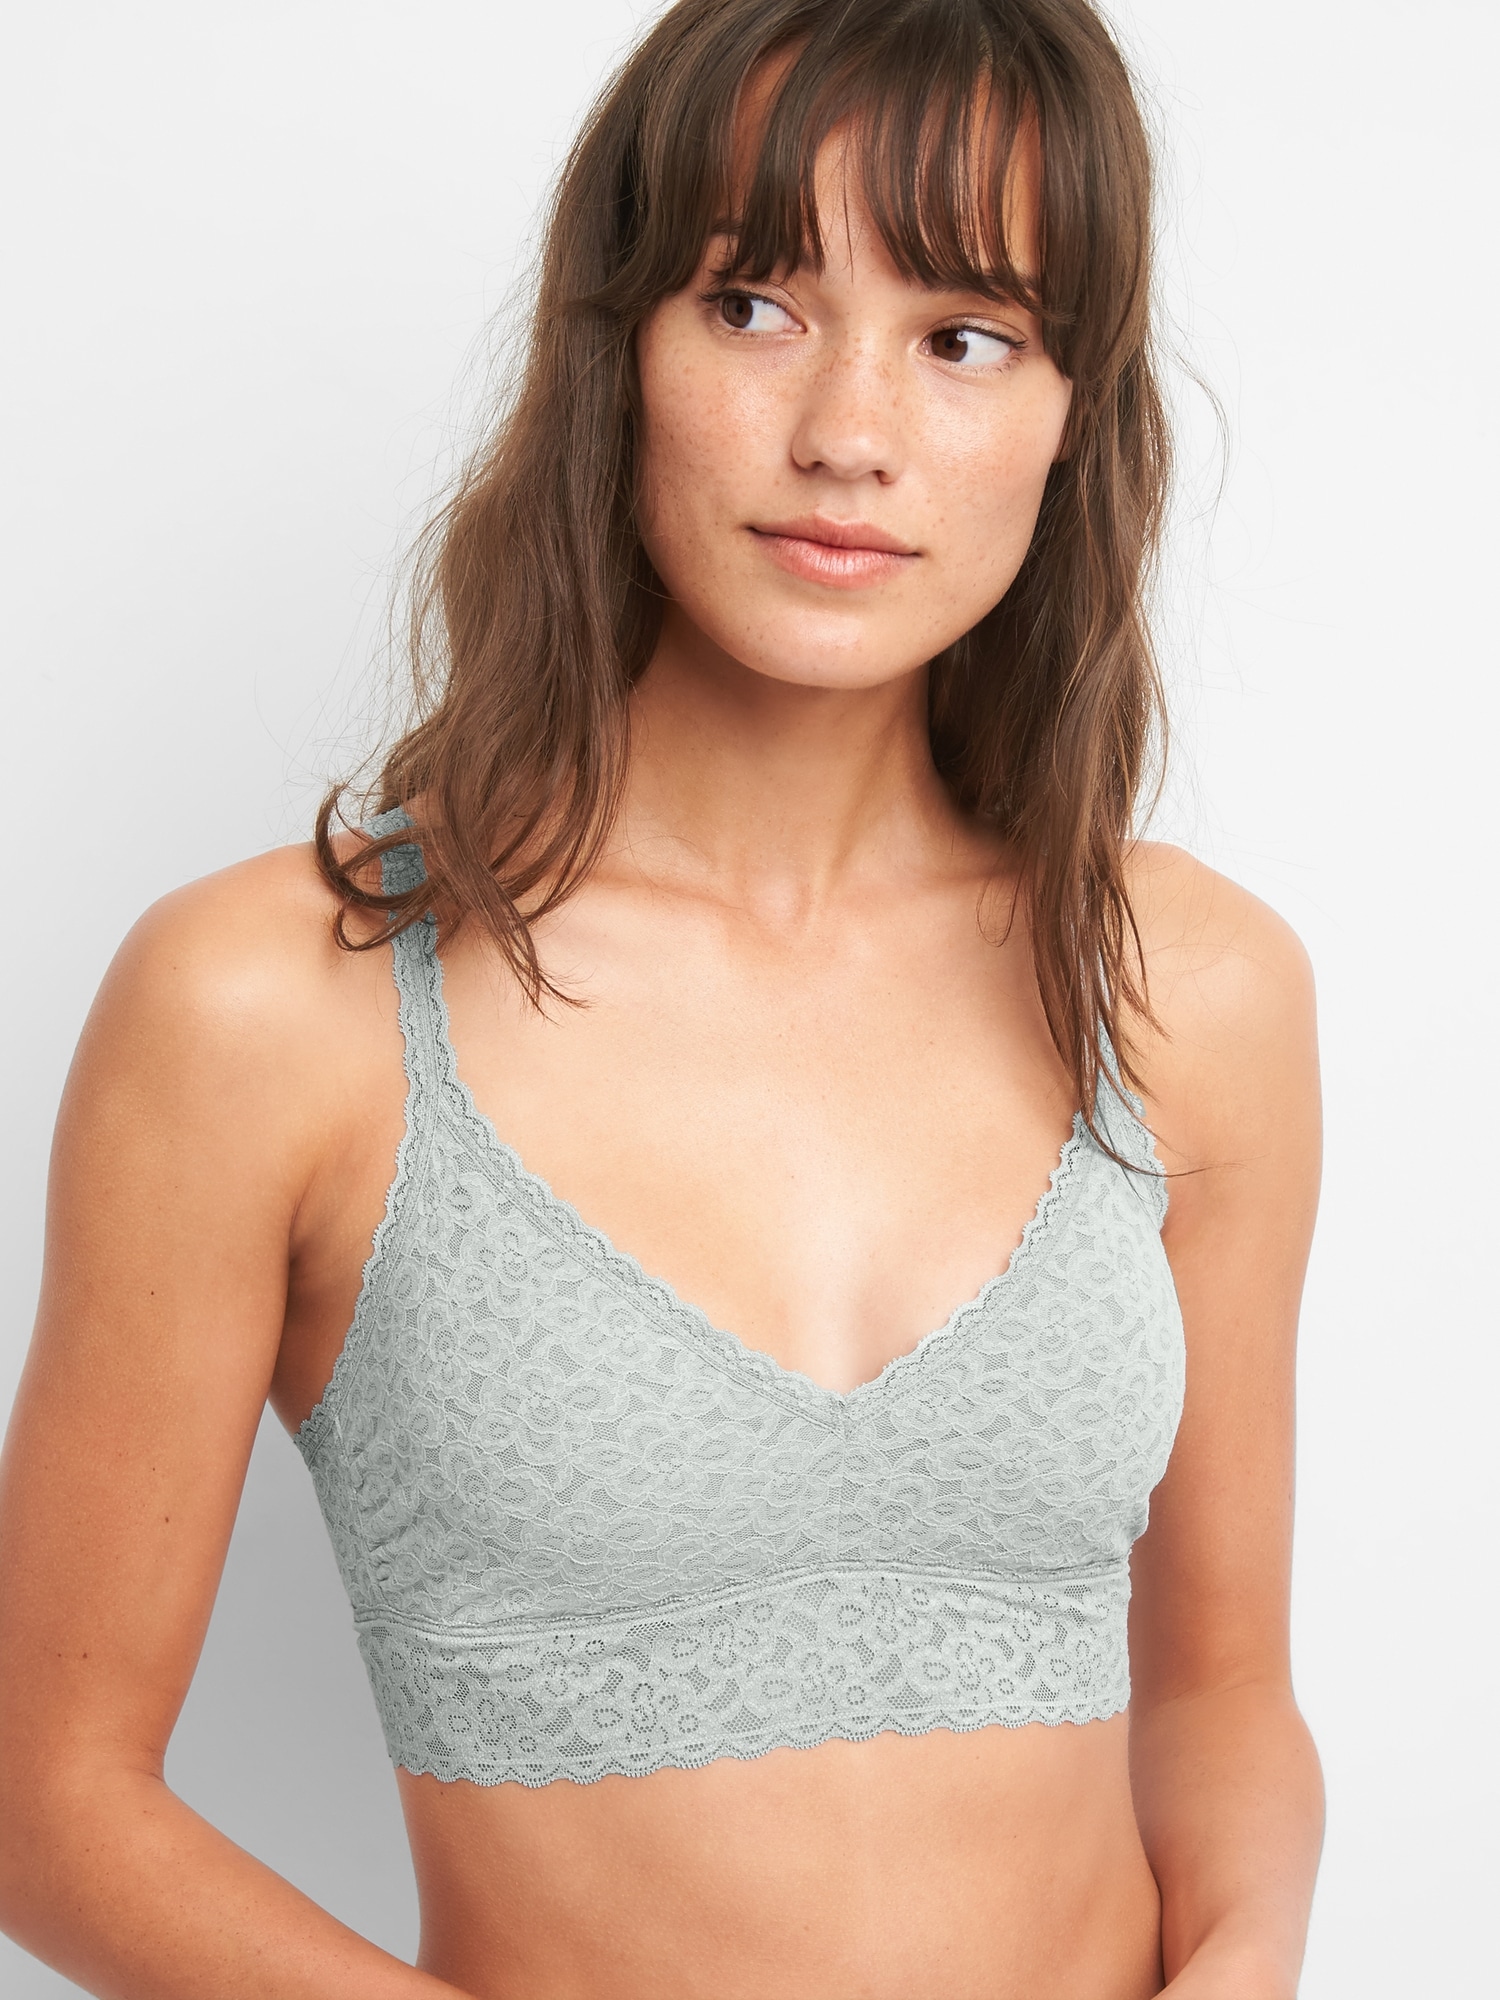 Classic Lace Bralette - Salmon pink